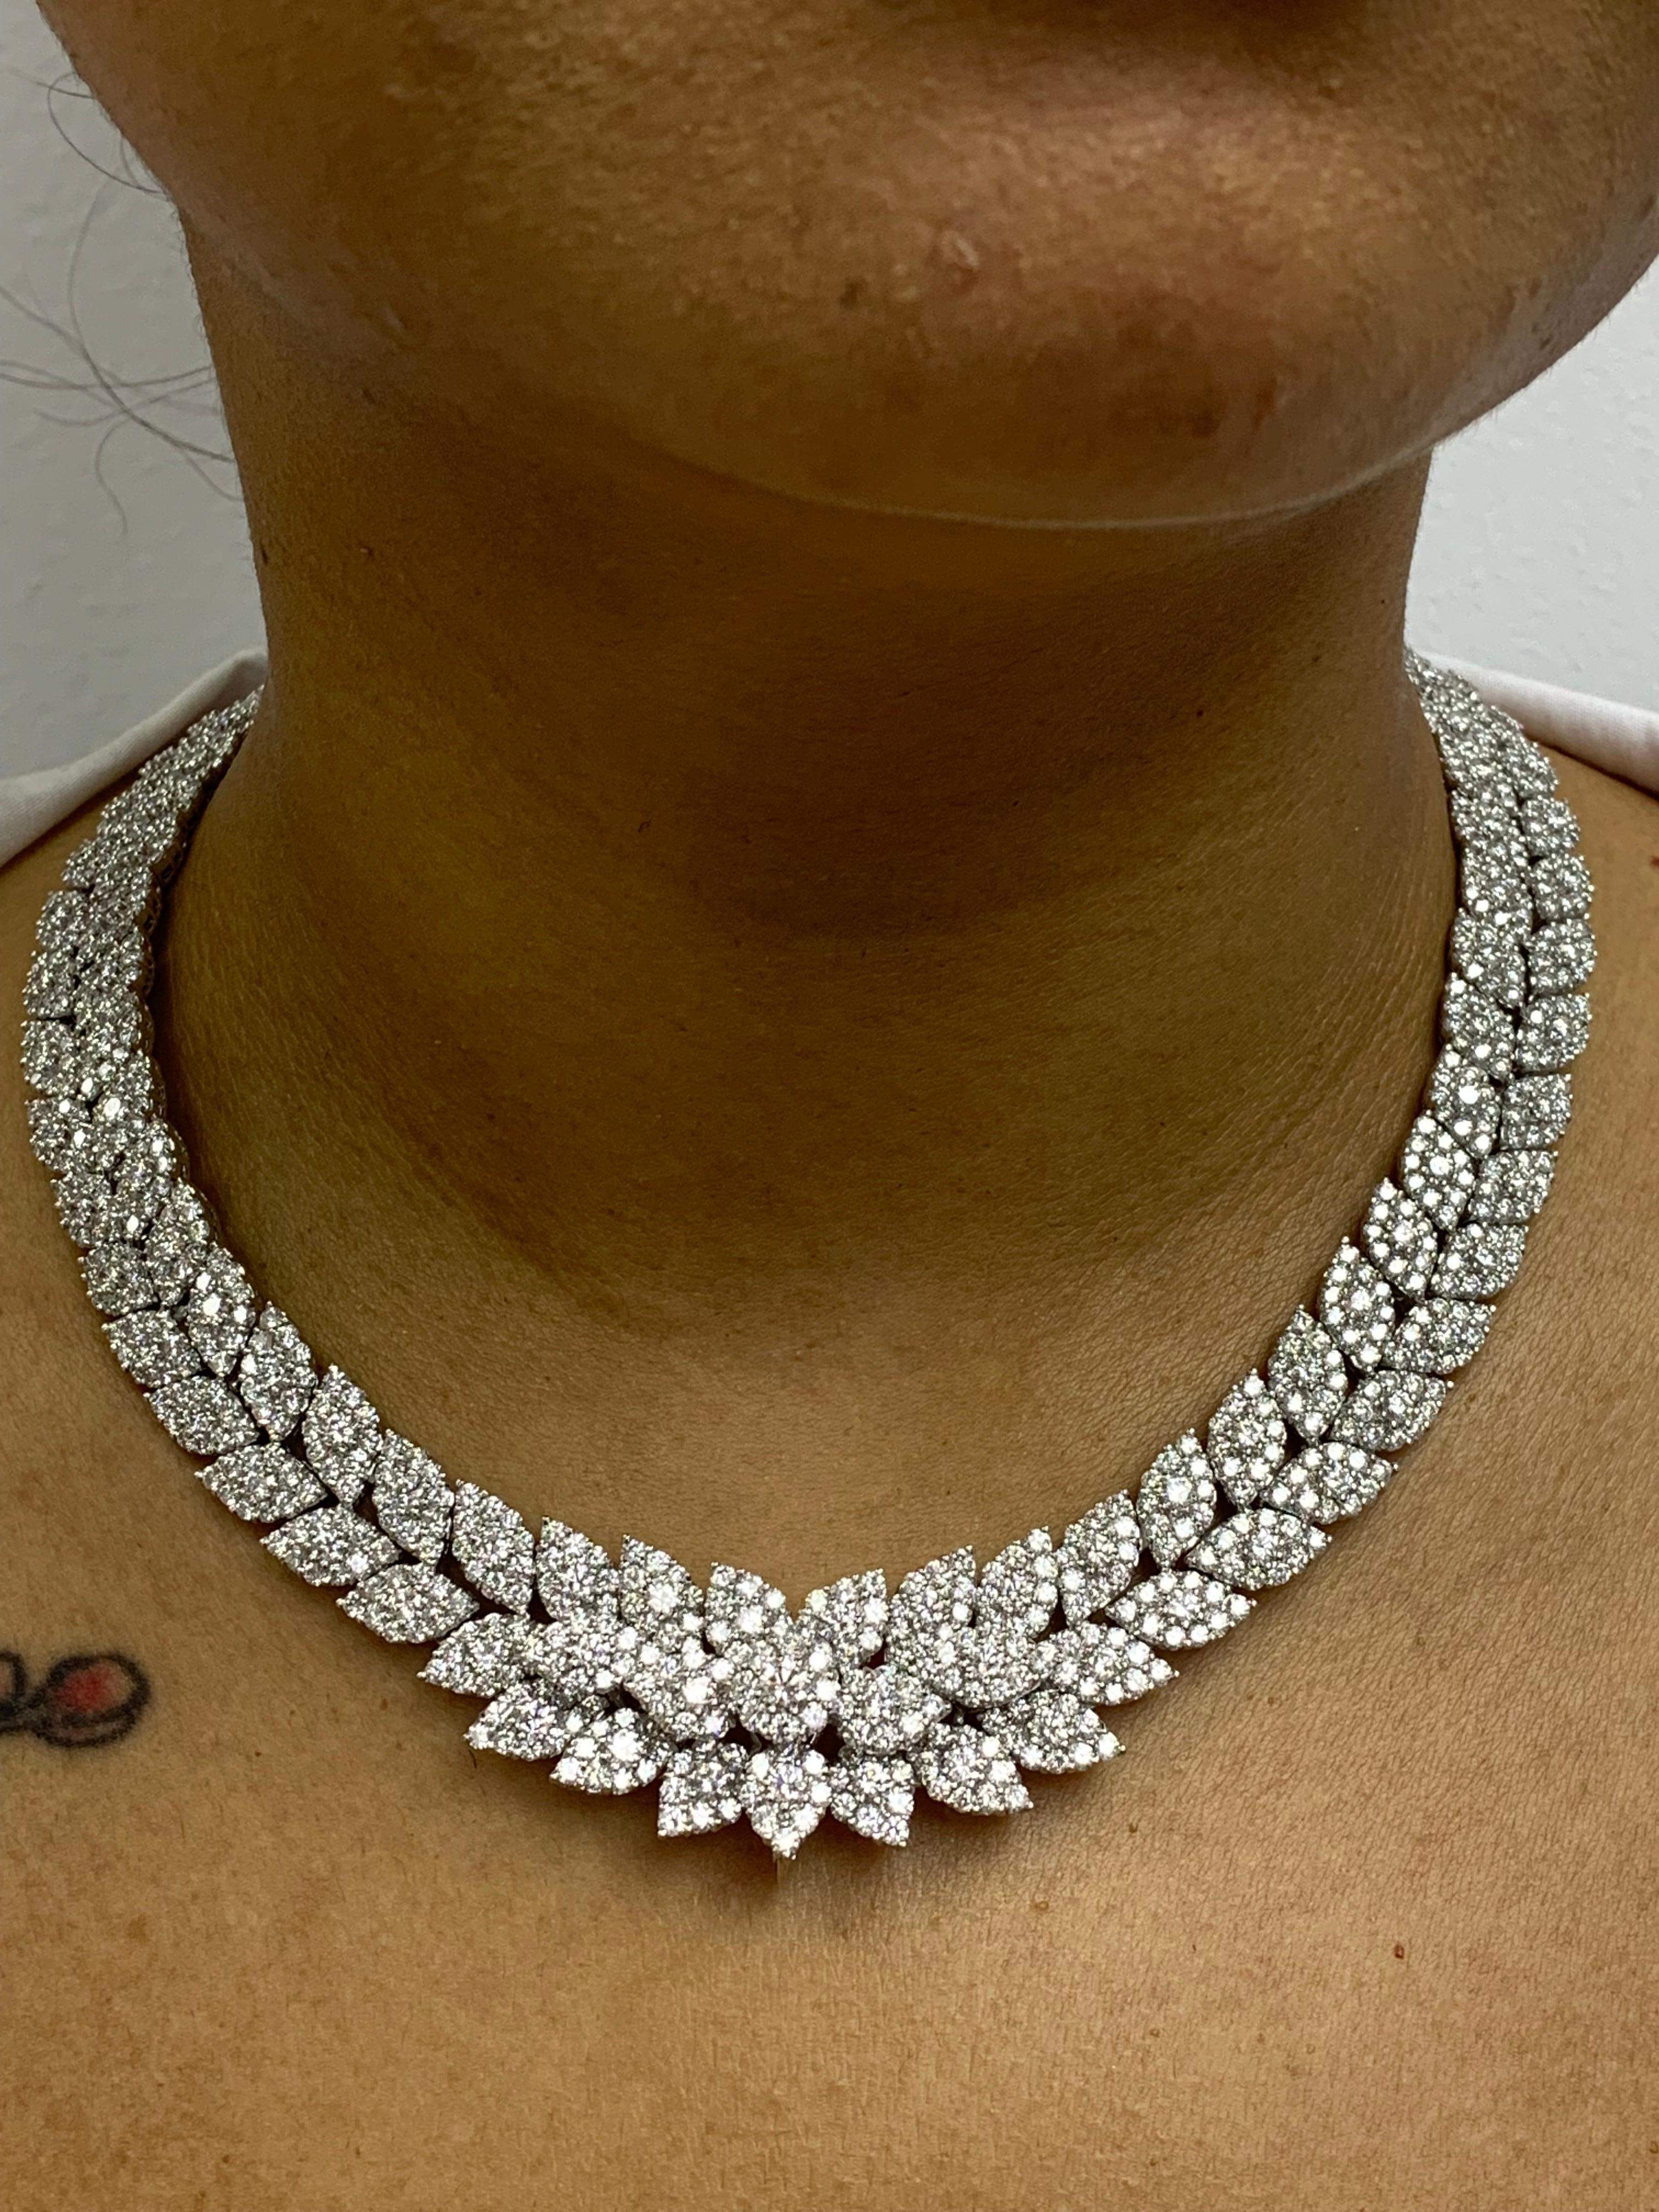 39.58 Carat Cluster Diamond Necklace in 18K White Gold For Sale 6